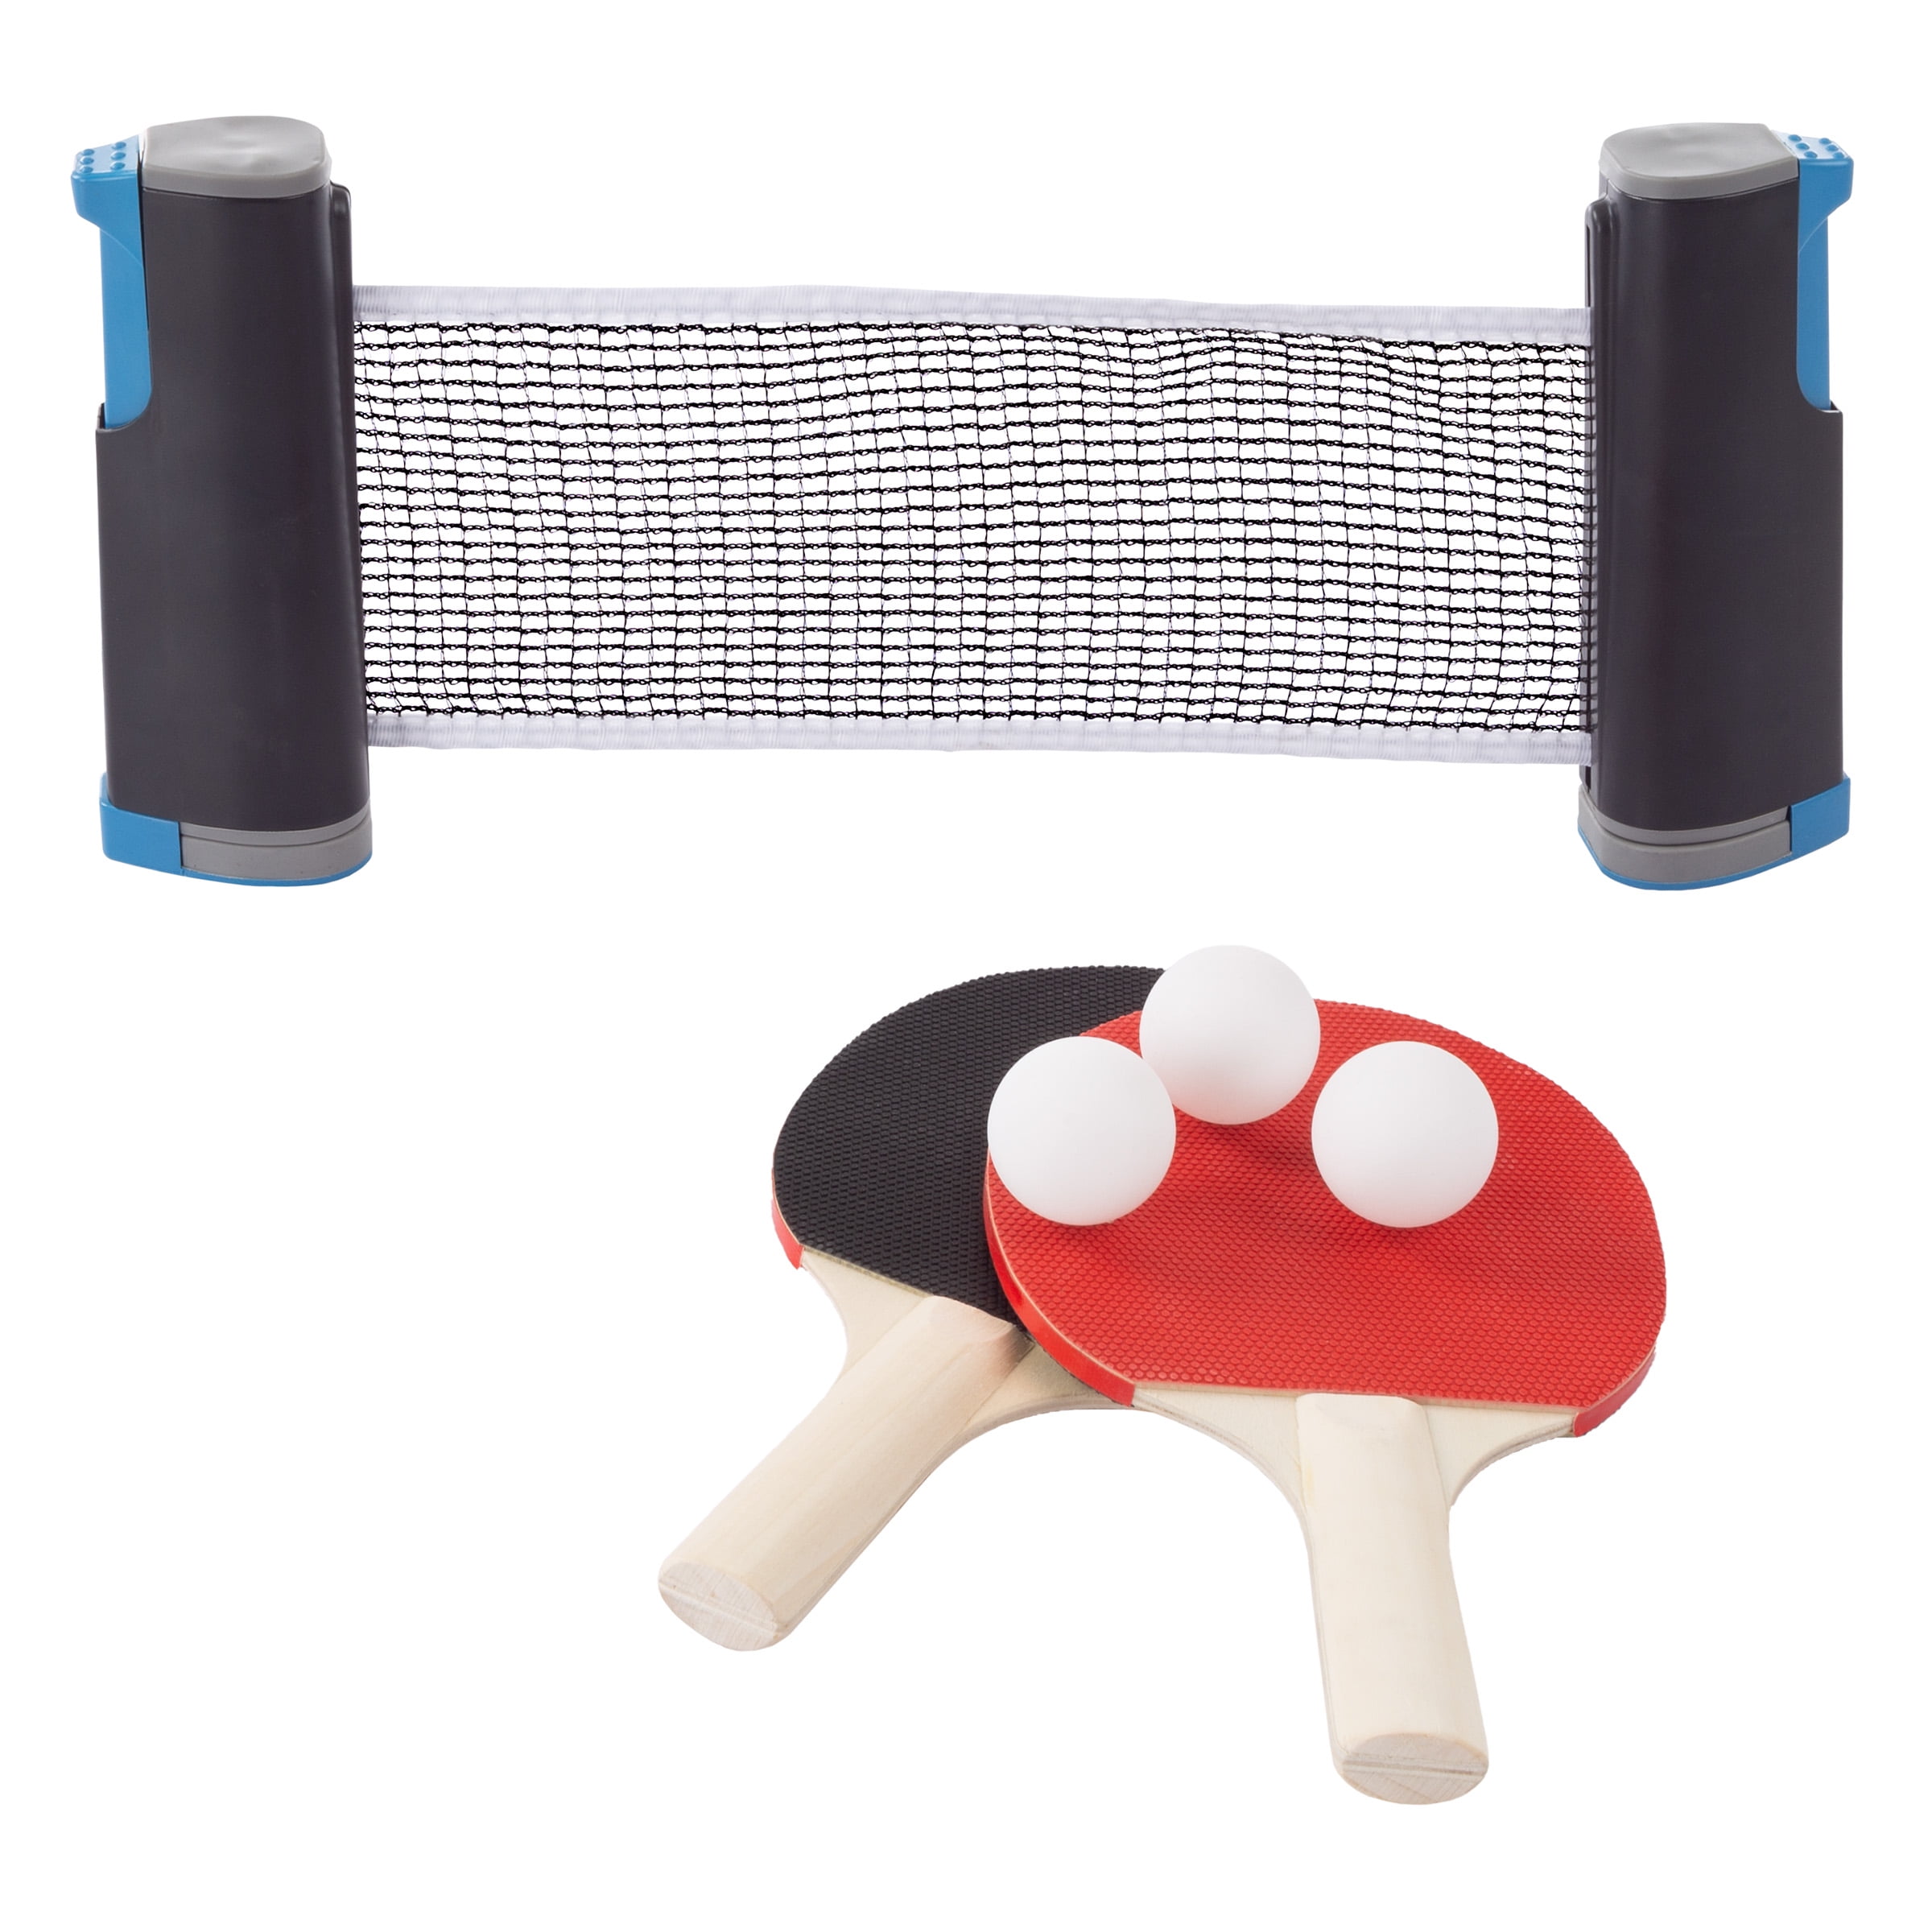 INSTANT TABLE TENNIS GAME INDOOR PORTABLE TRAVEL PING PONG BALL SET EXTENDABLE 